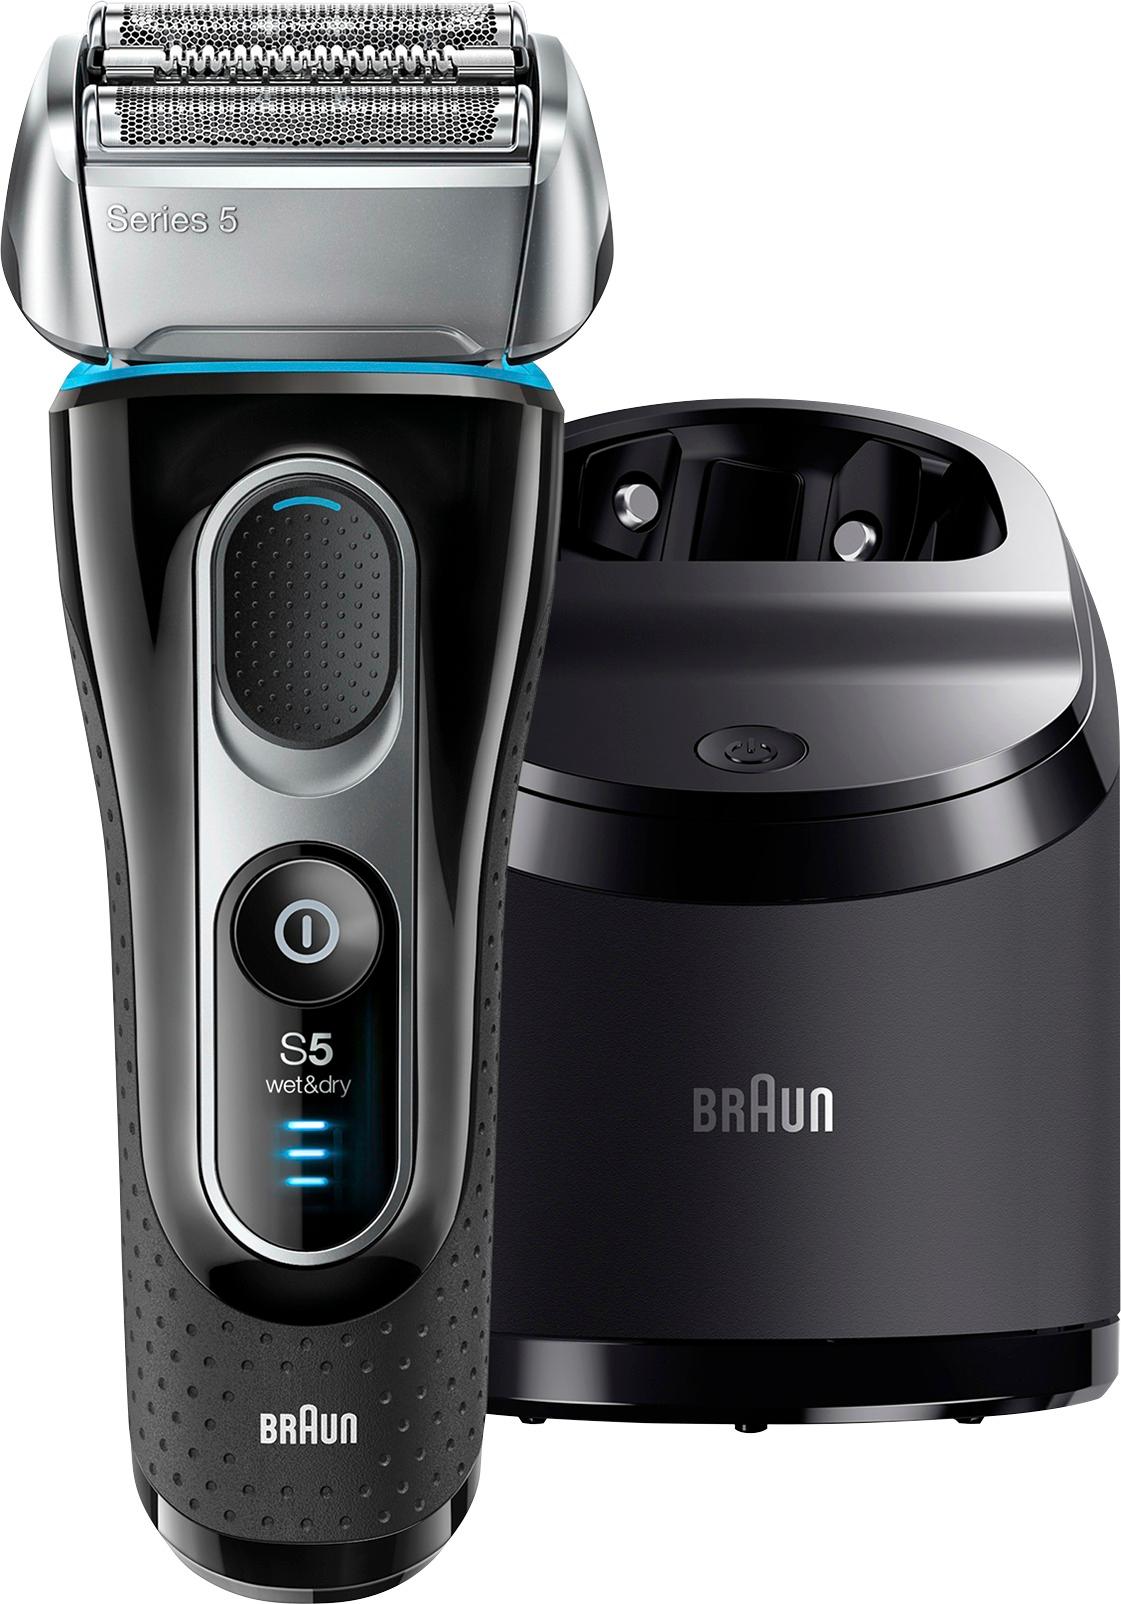 Braun - Series 5 Electric Shaver - Black was $179.99 now $124.99 (31.0% off)